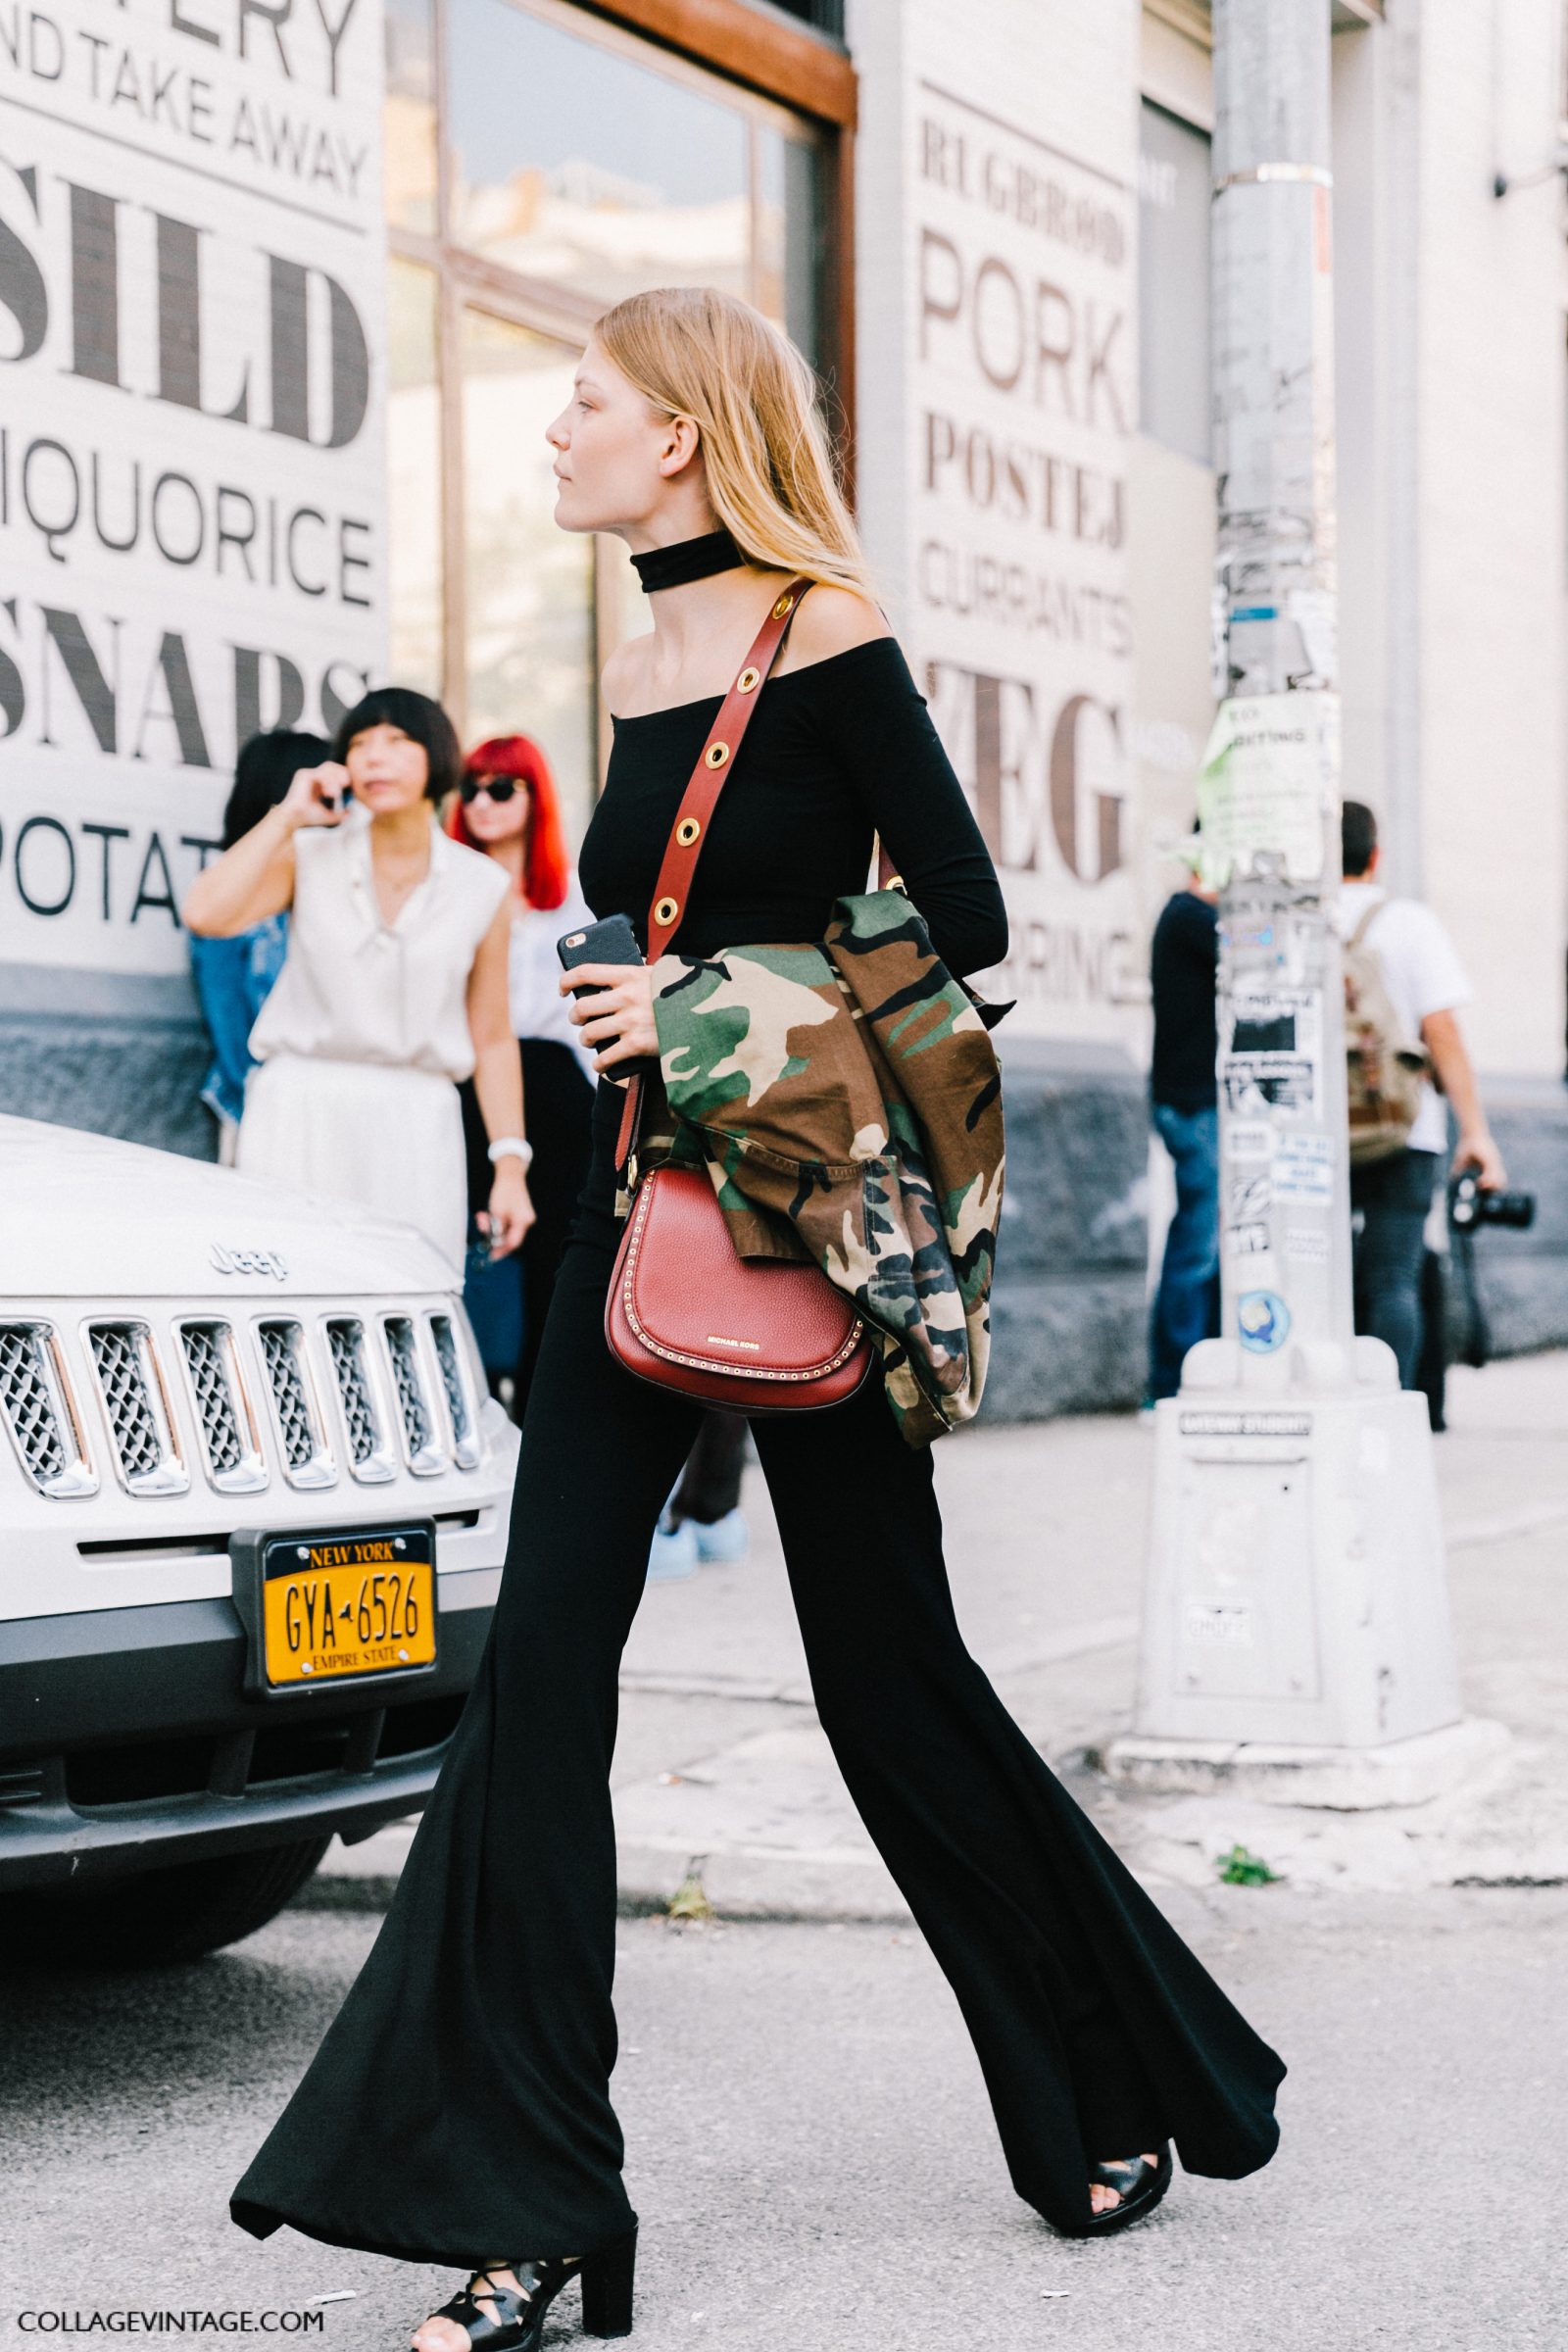 nyfw-new_york_fashion_week_ss17-street_style-outfits-collage_vintage-vintage-del_pozo-michael_kors-hugo_boss-85